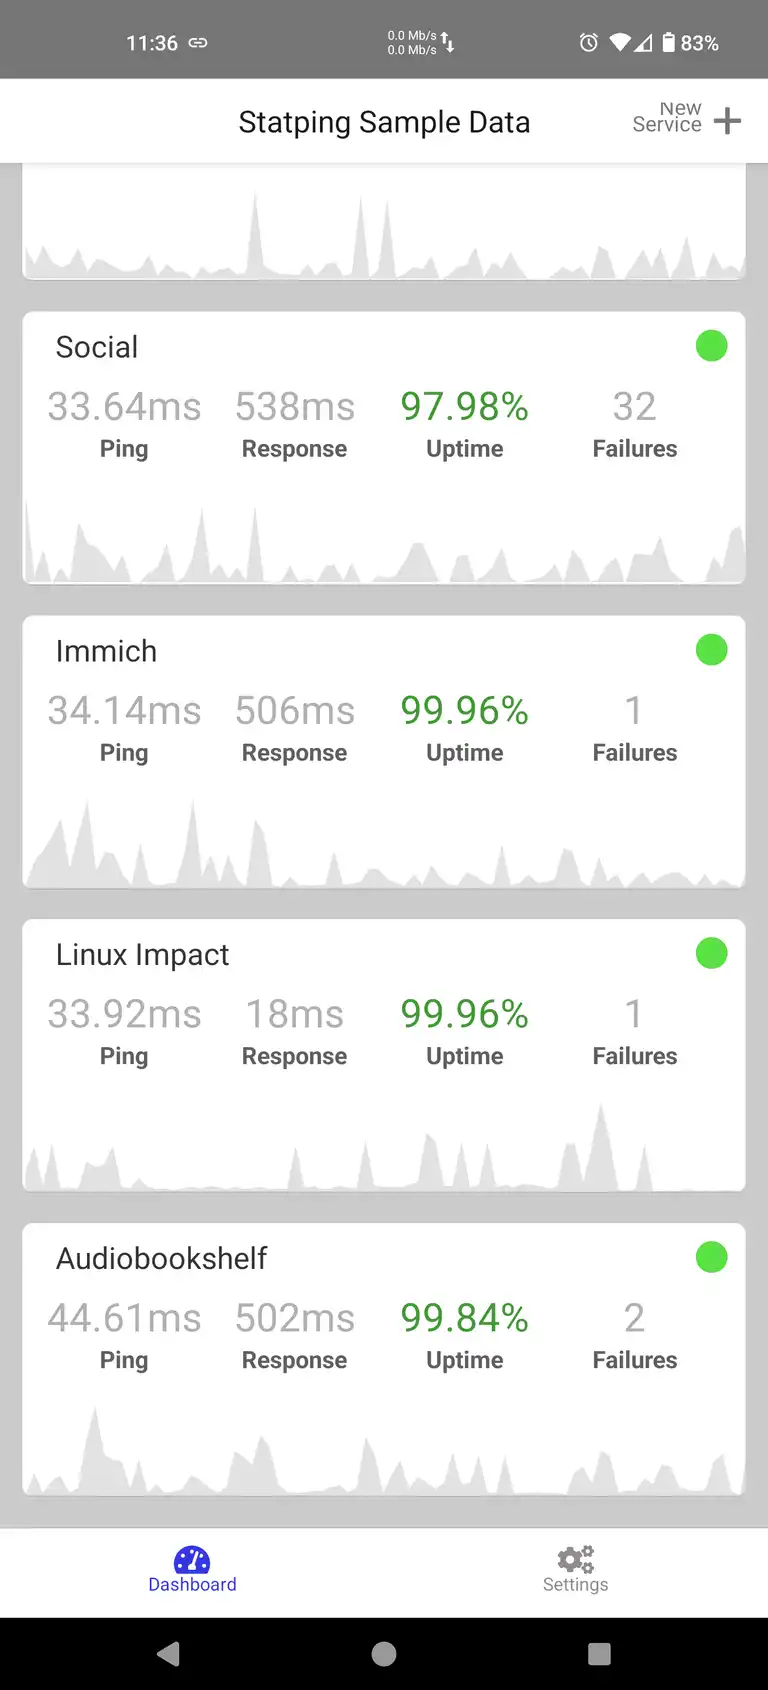 Statping android app overview page showing linux impact and other services